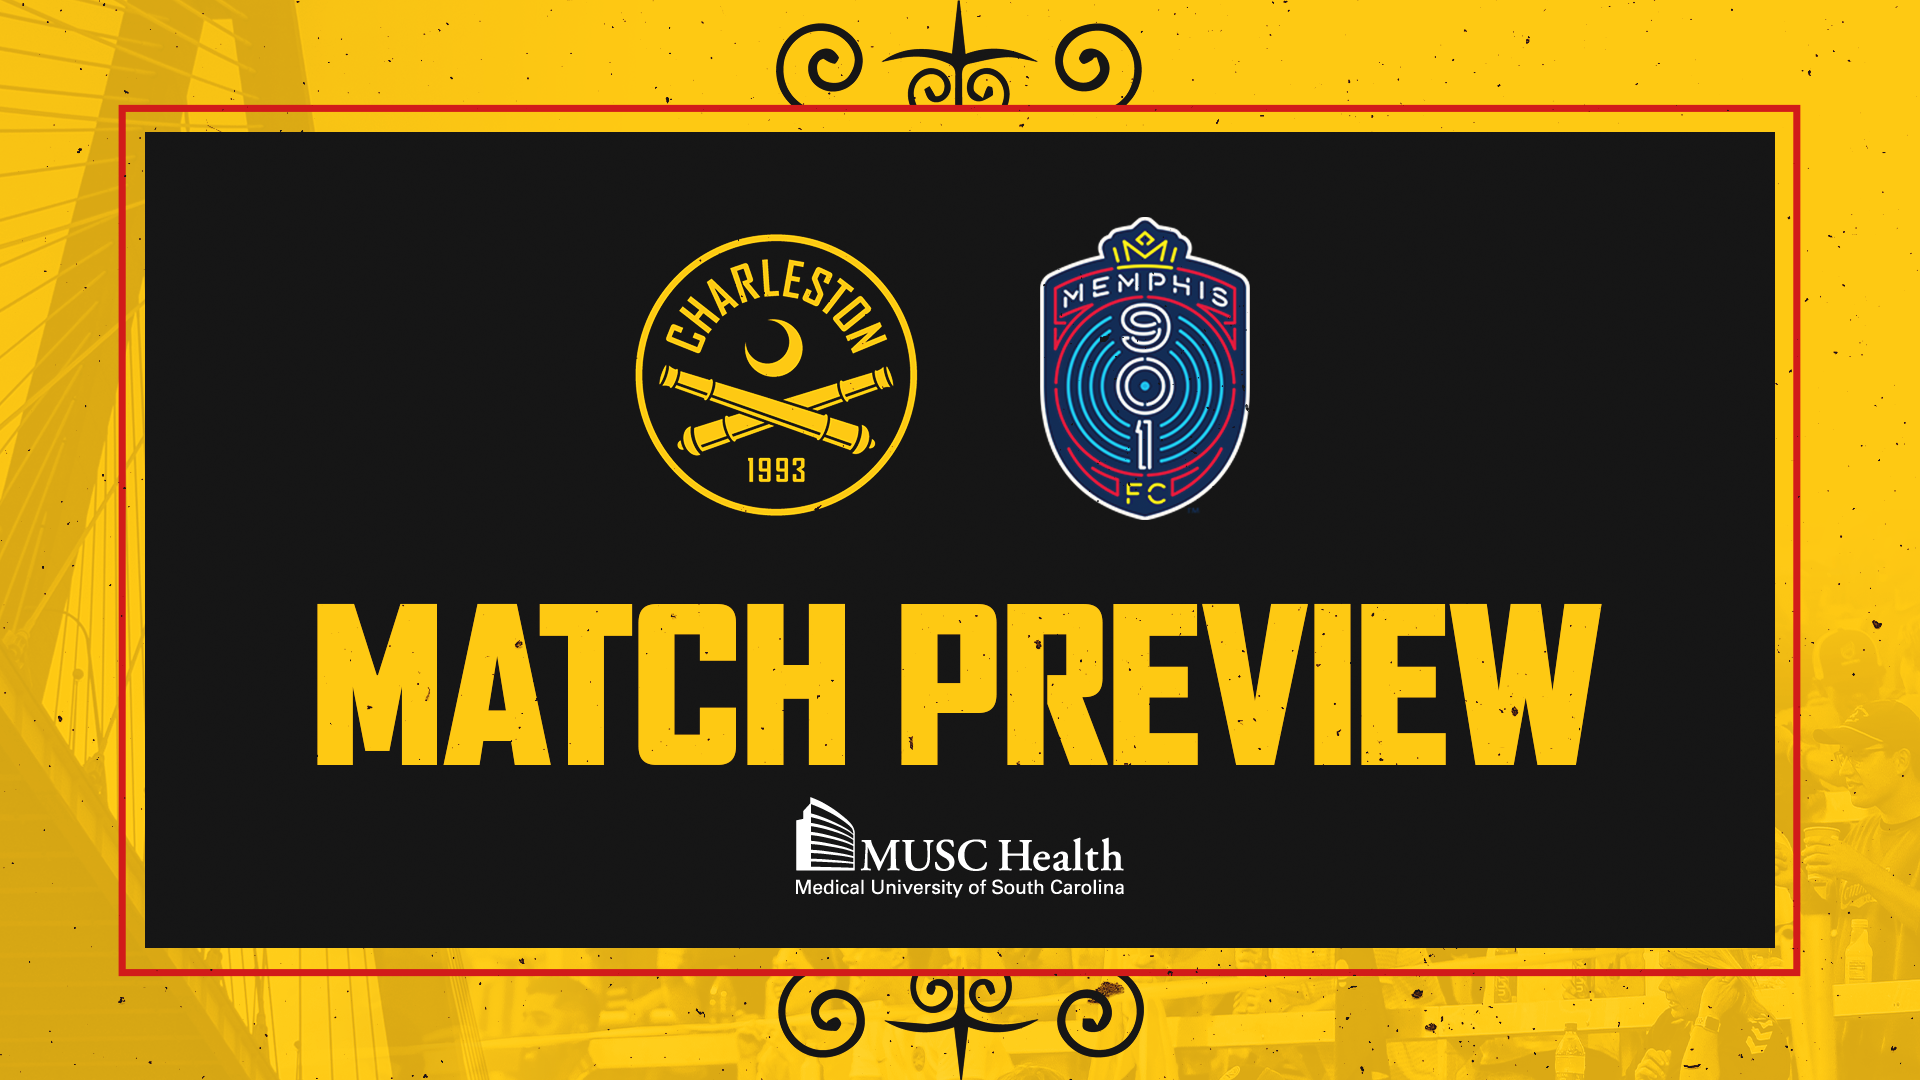 Home Playoff Game: Memphis 901 FC vs. Louisville City preview